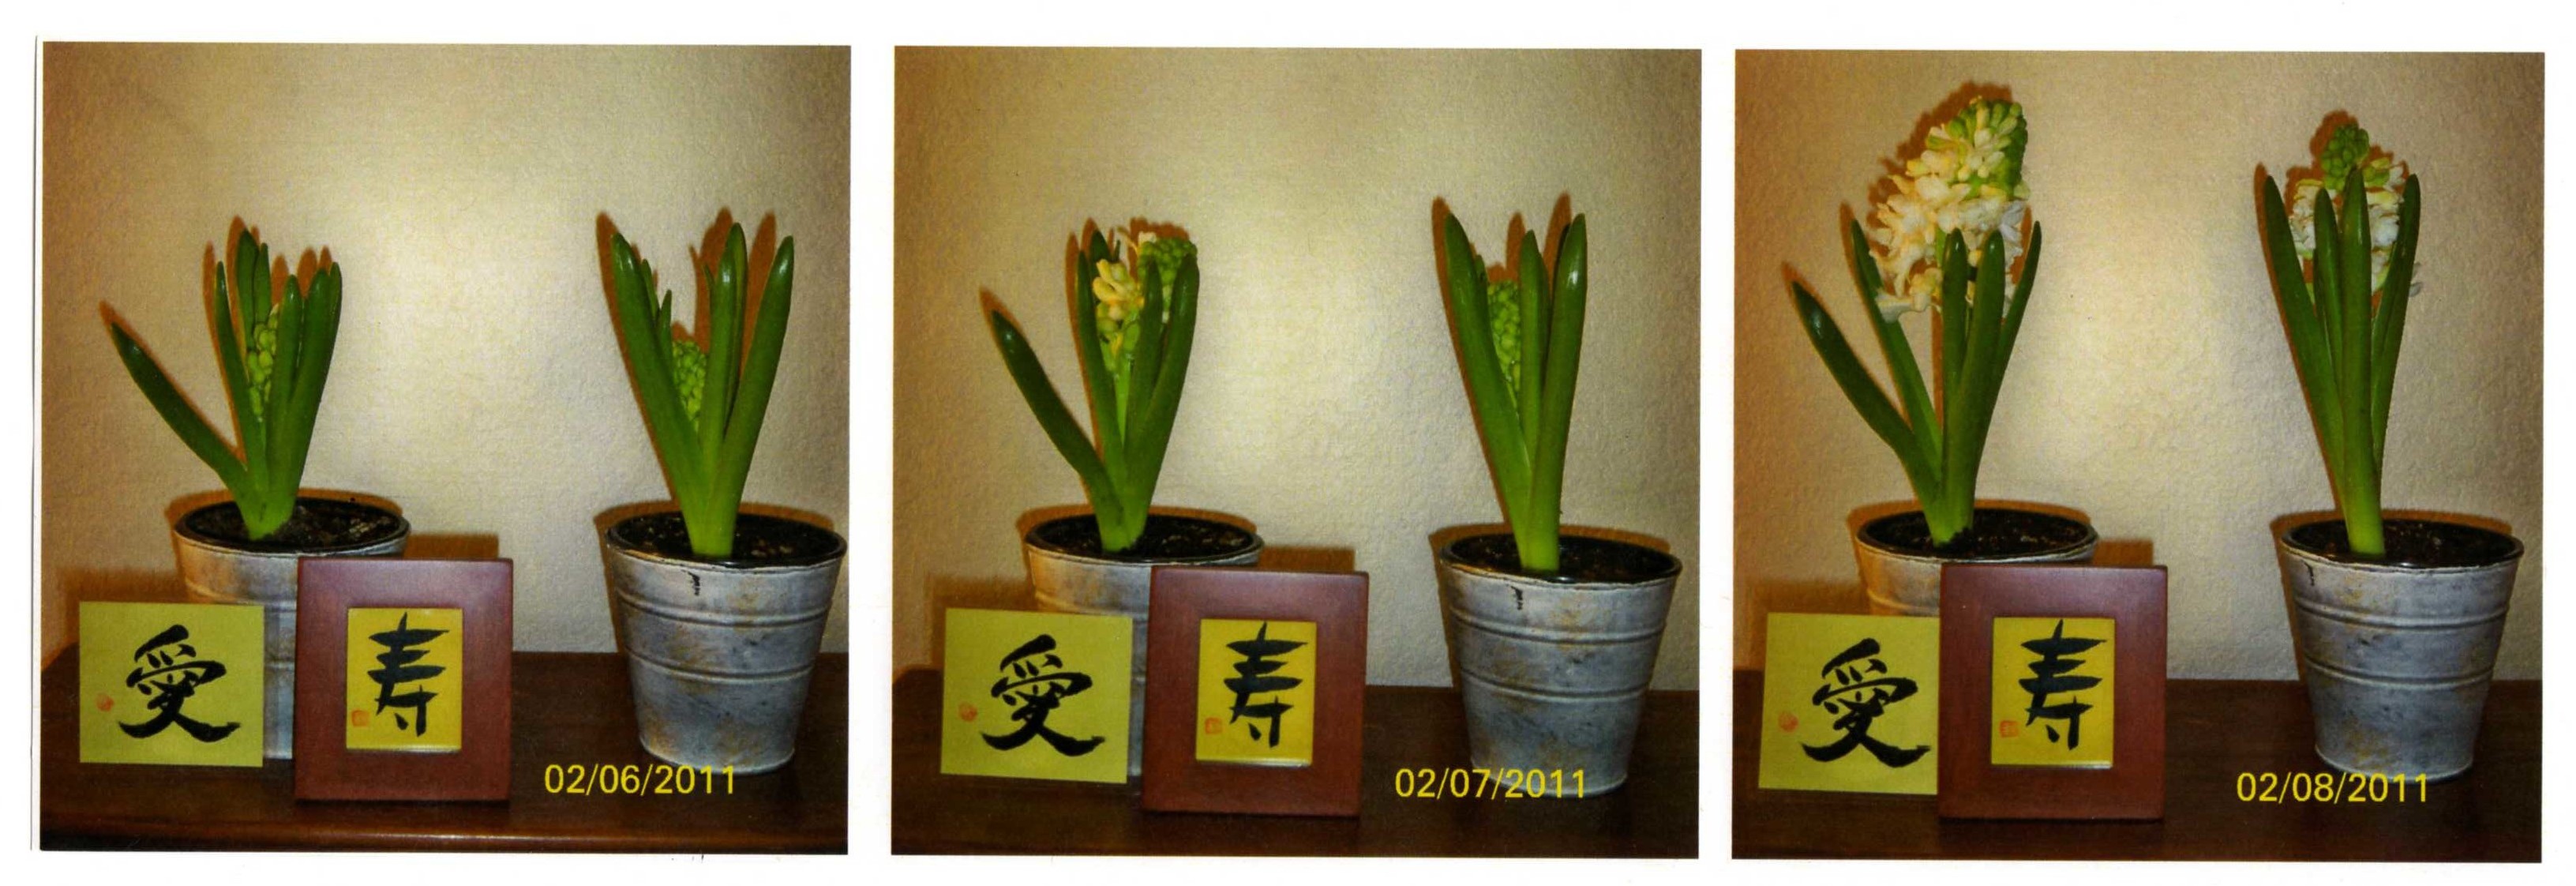 Divinity Shodo Artwork - Test with Plants - Quantifiable Results